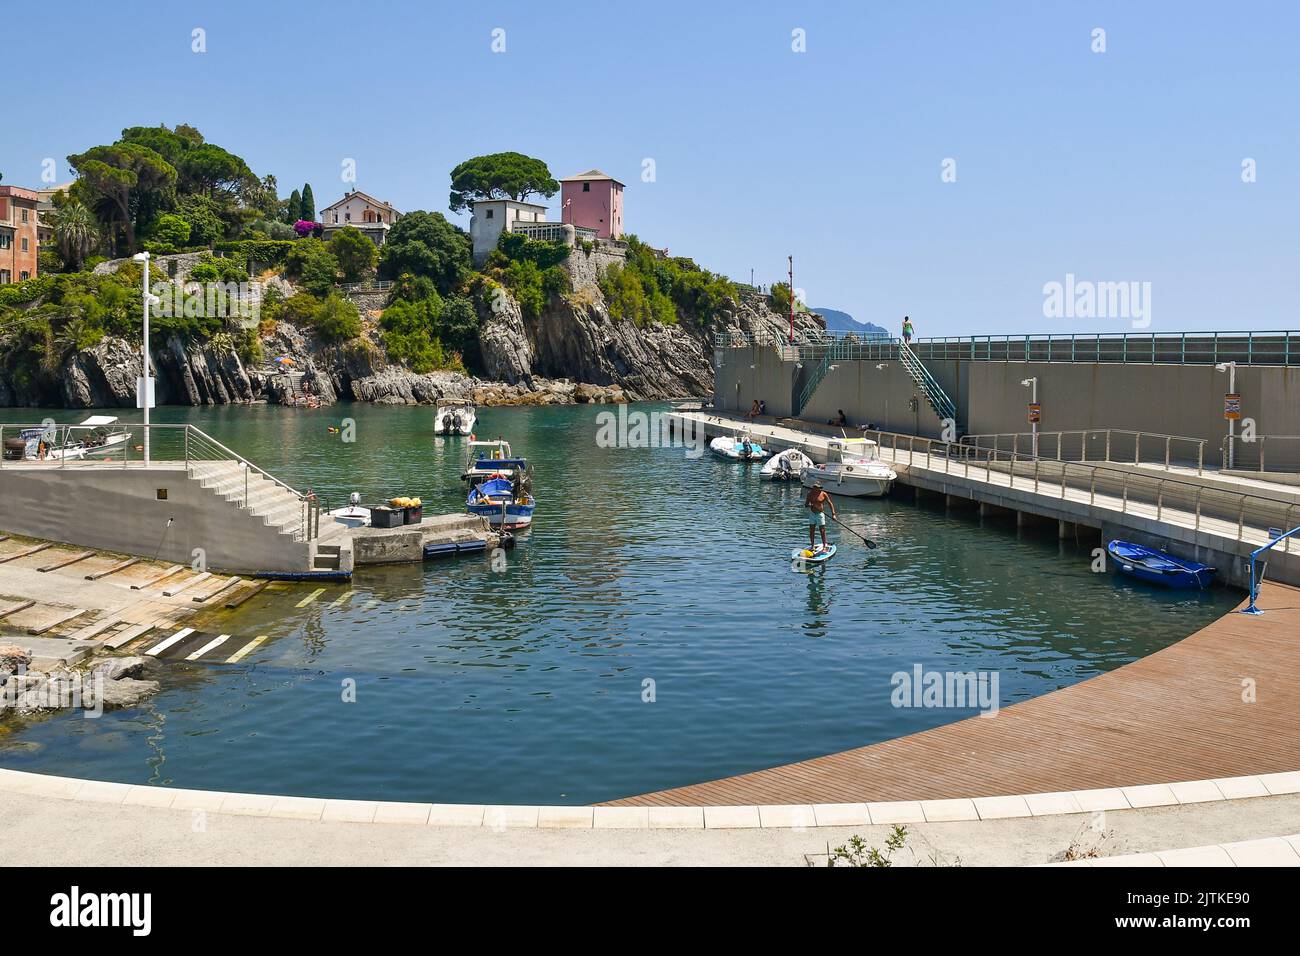 View of the small port of the old fishing village with a man sup paddling in summer, Nervi, Genoa, Liguria, Italy Stock Photo